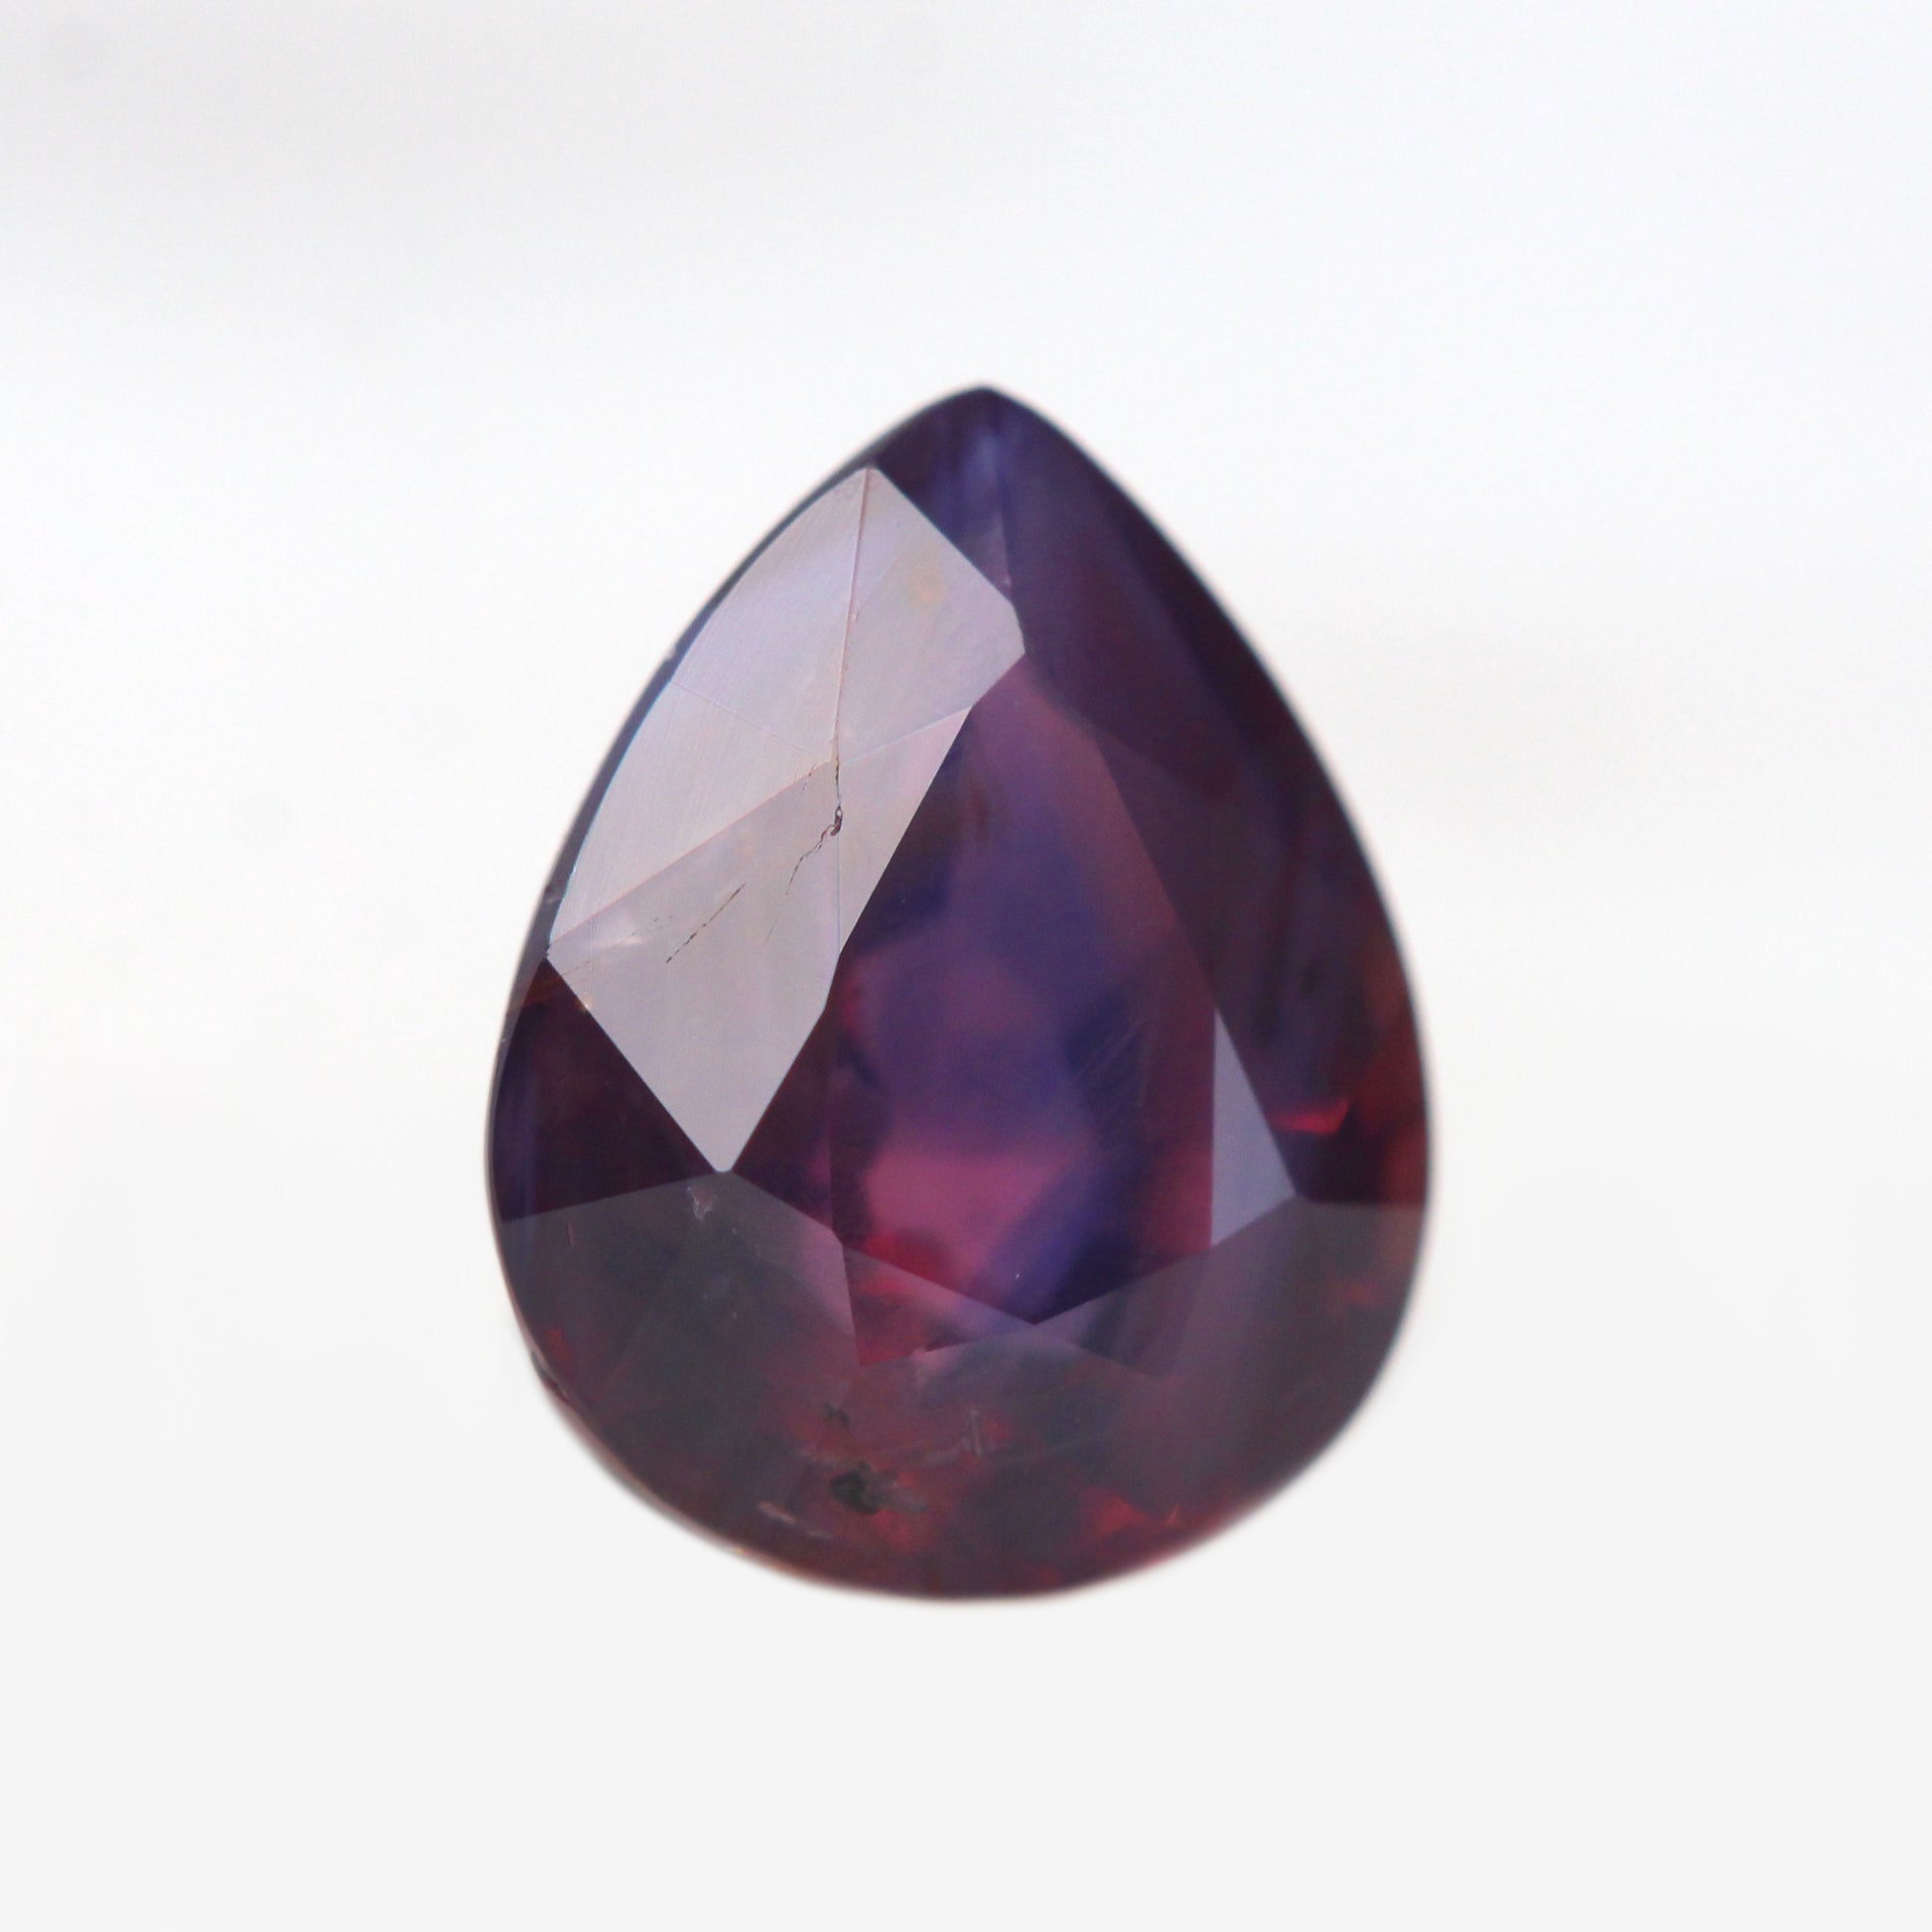 1.14 Carat Pear Berry Purple Madagascar Sapphire for Custom Work - Inventory Code PPS114 - Midwinter Co. Alternative Bridal Rings and Modern Fine Jewelry